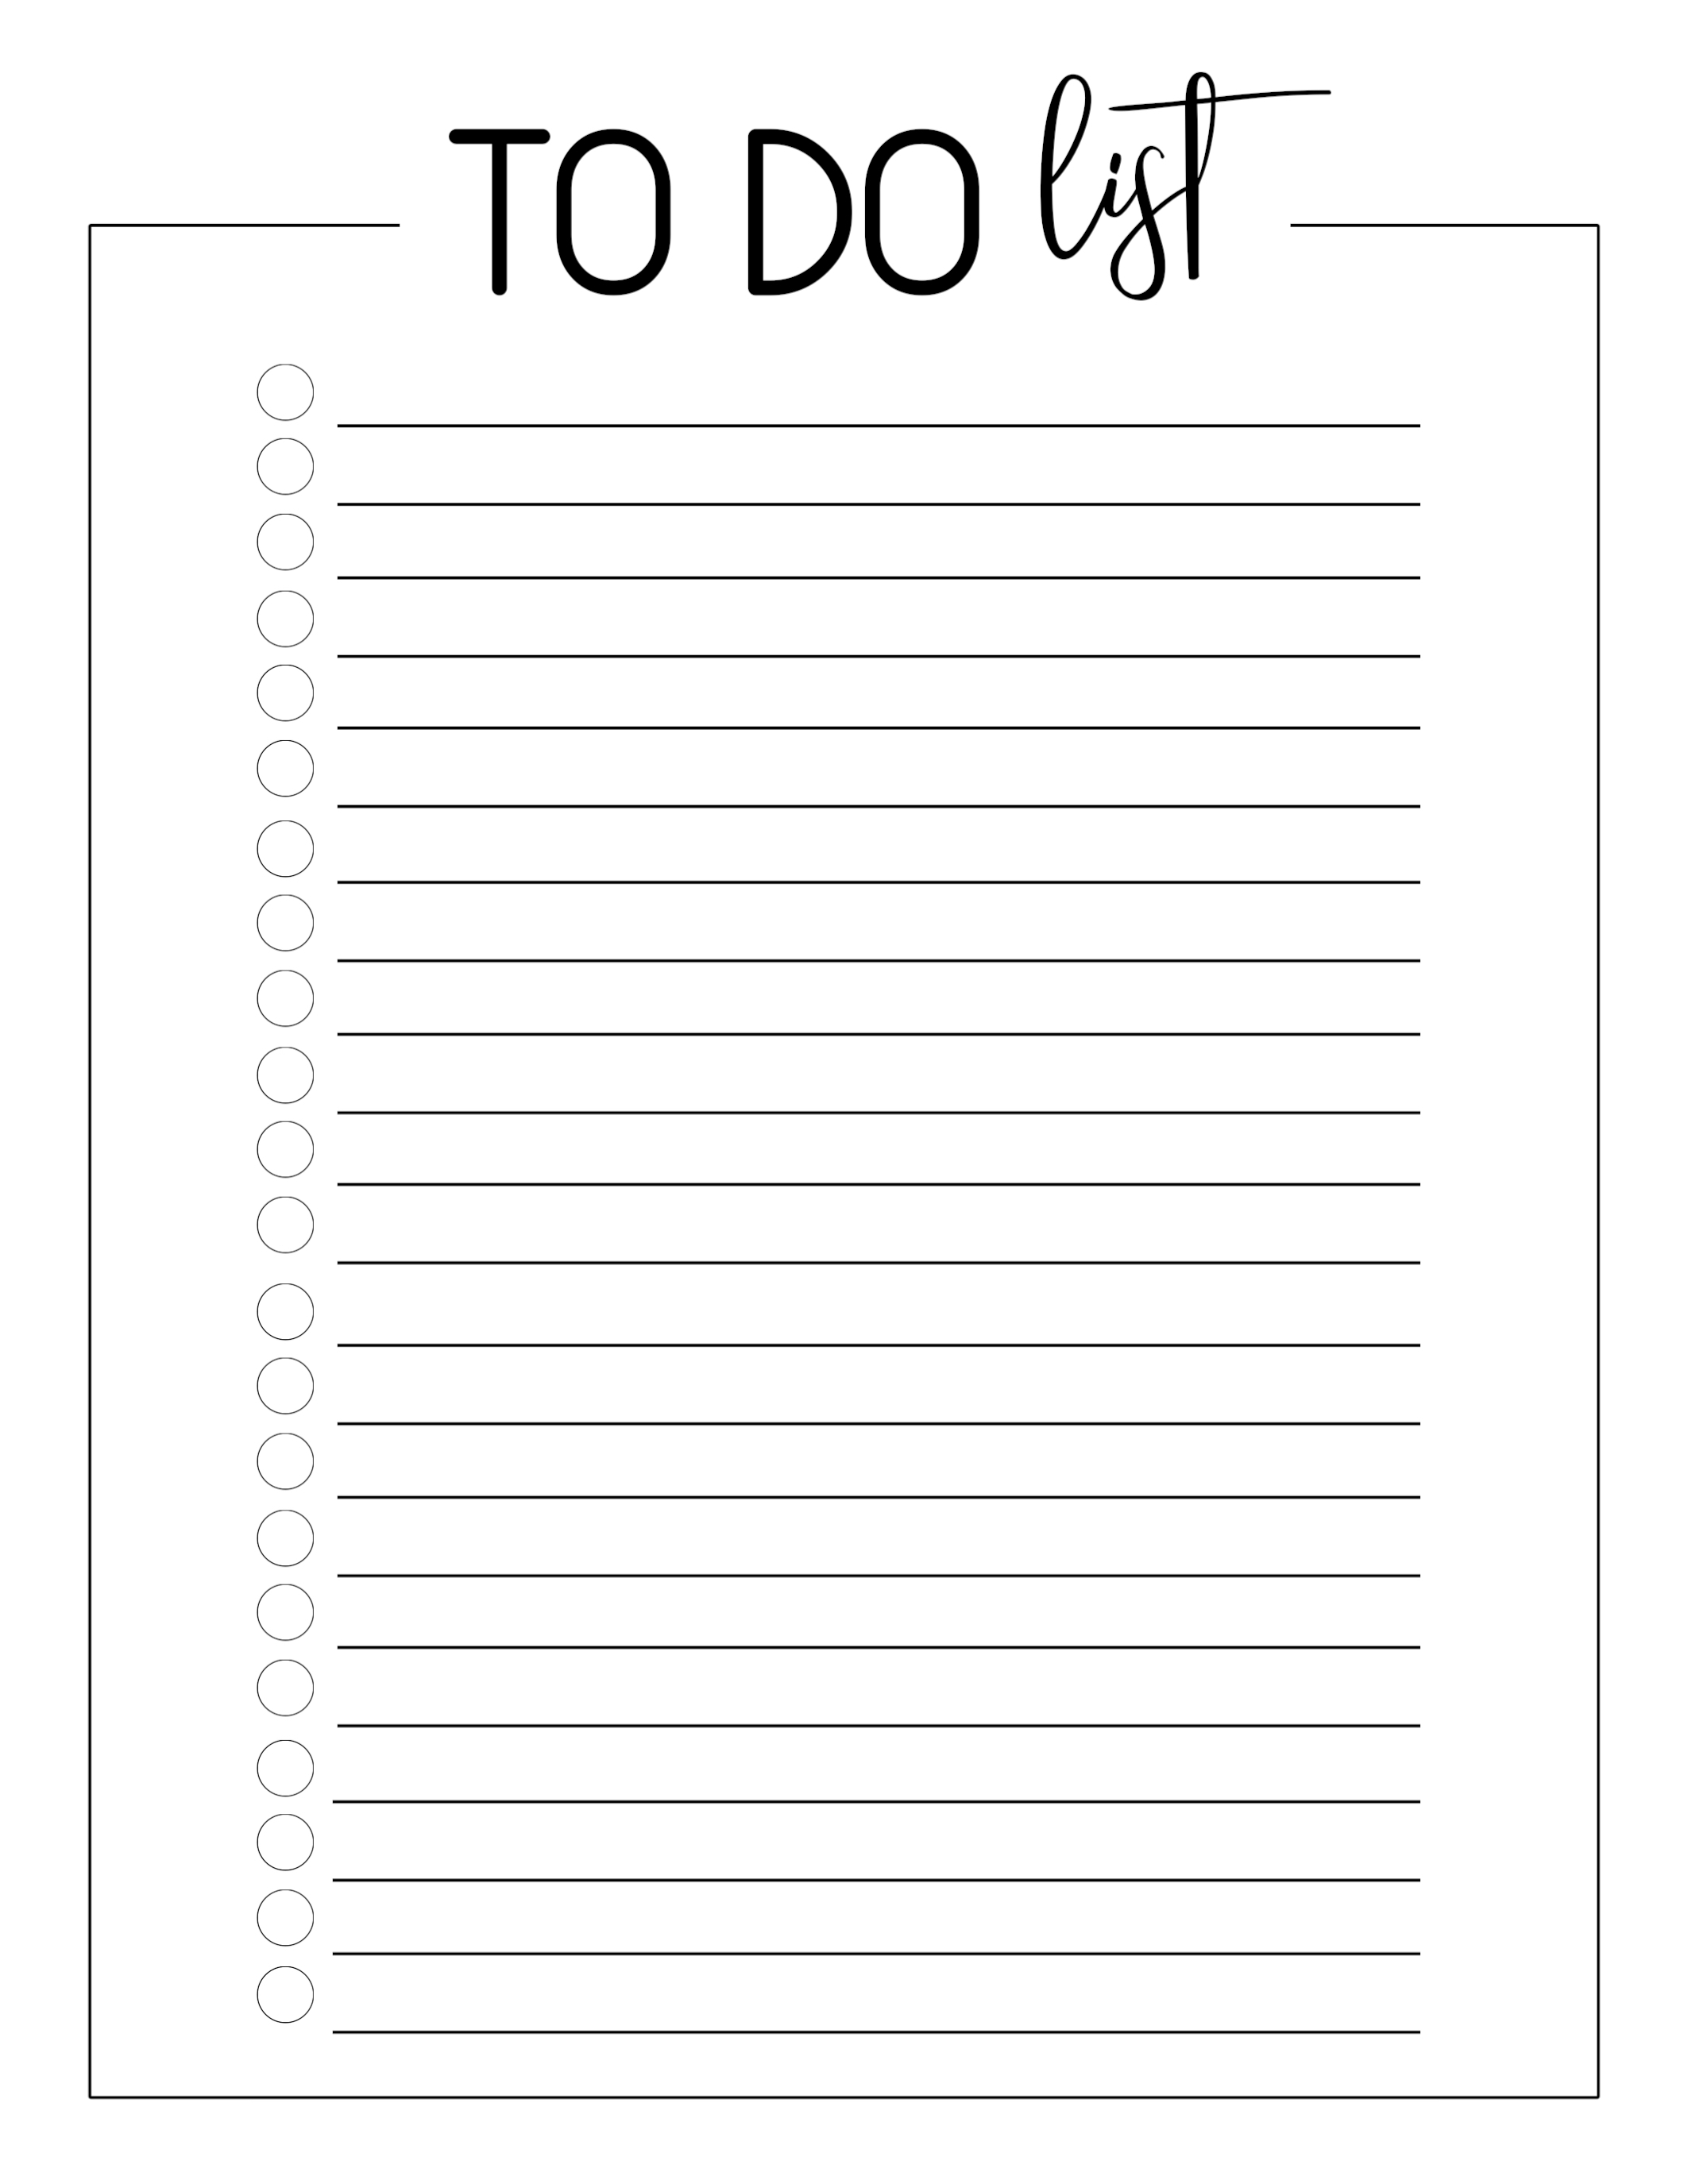 3Cf515 Blank Checklist Templates | Wiring Library throughout Printable Blank Checklist